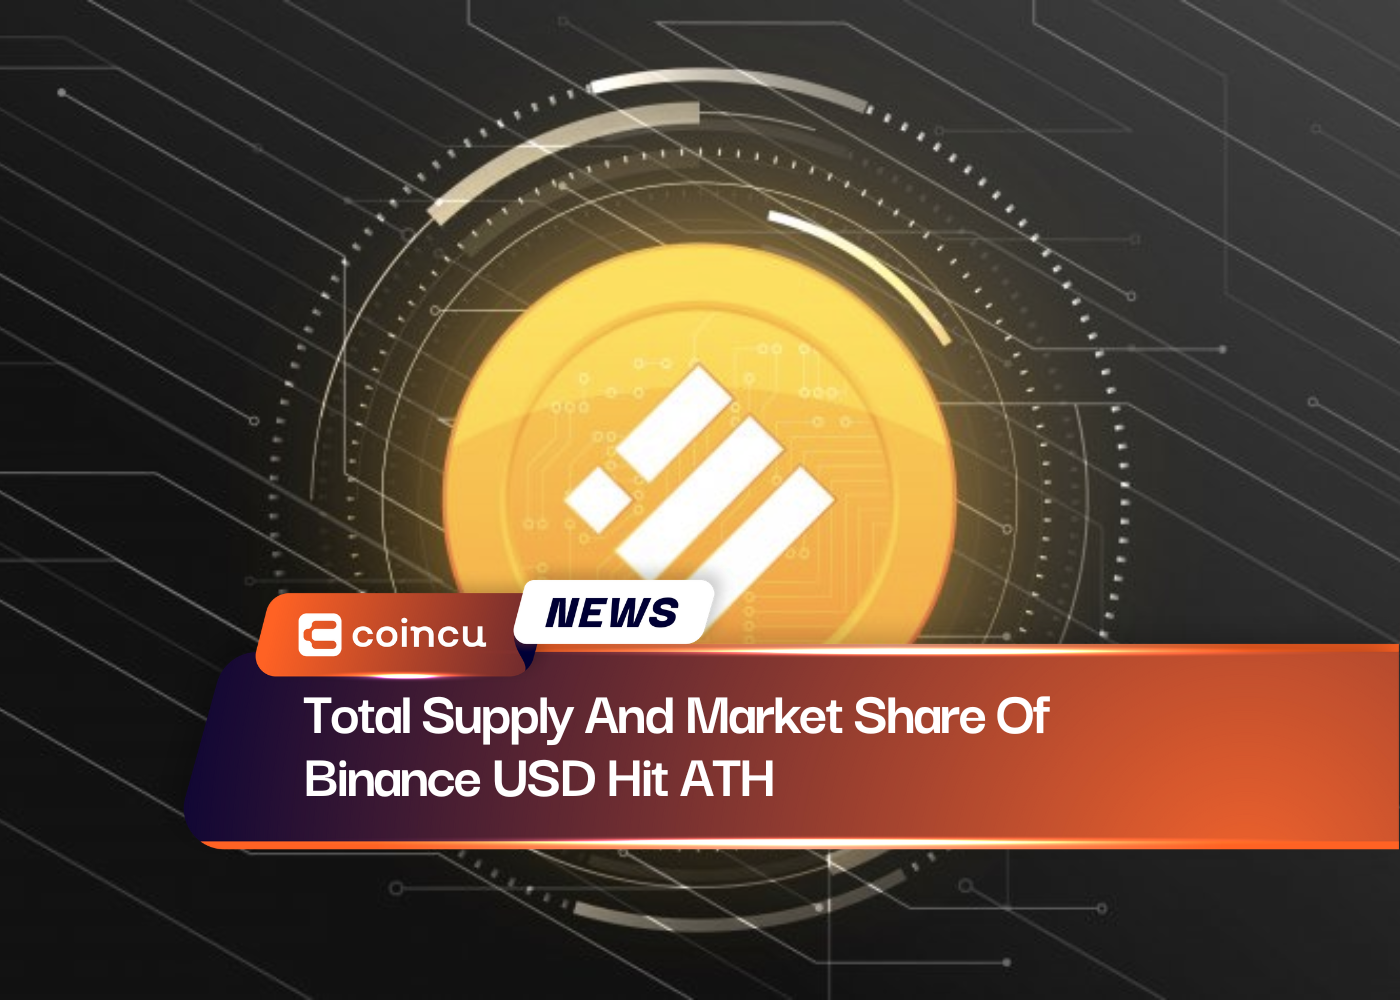 Total Supply And Market Share Of Binance USD Hit ATH